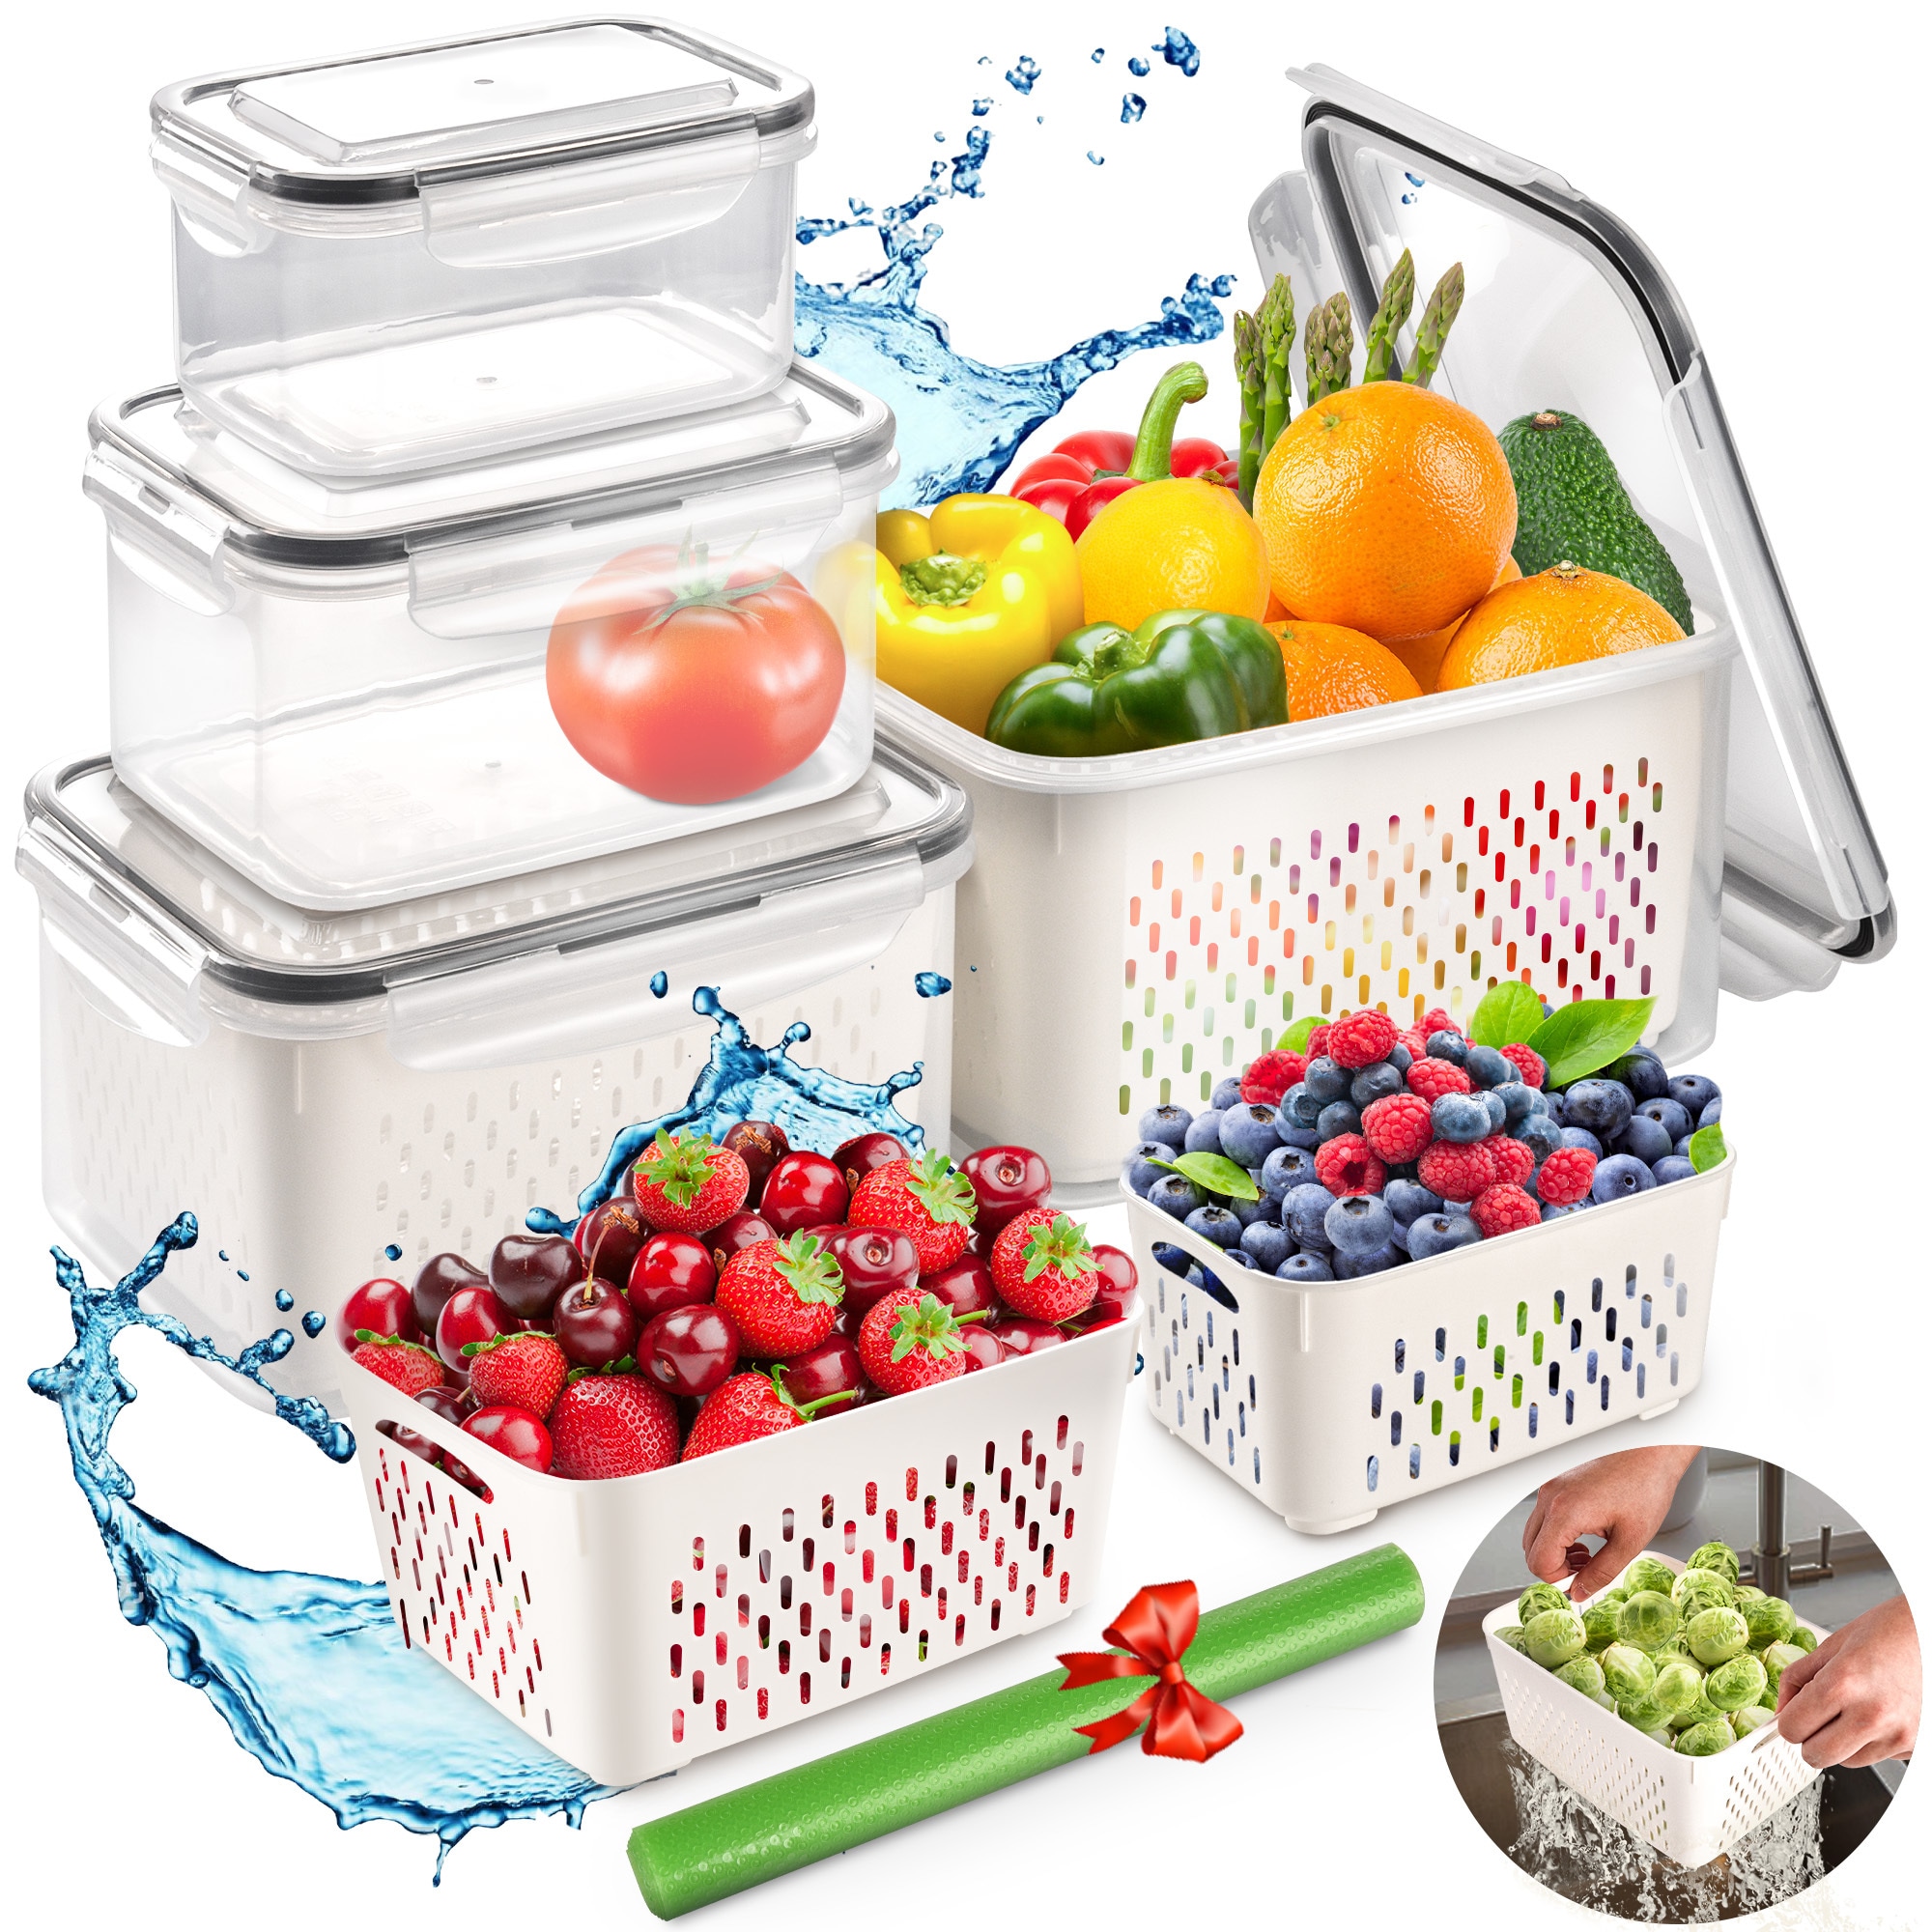 White Food Storage Containers at